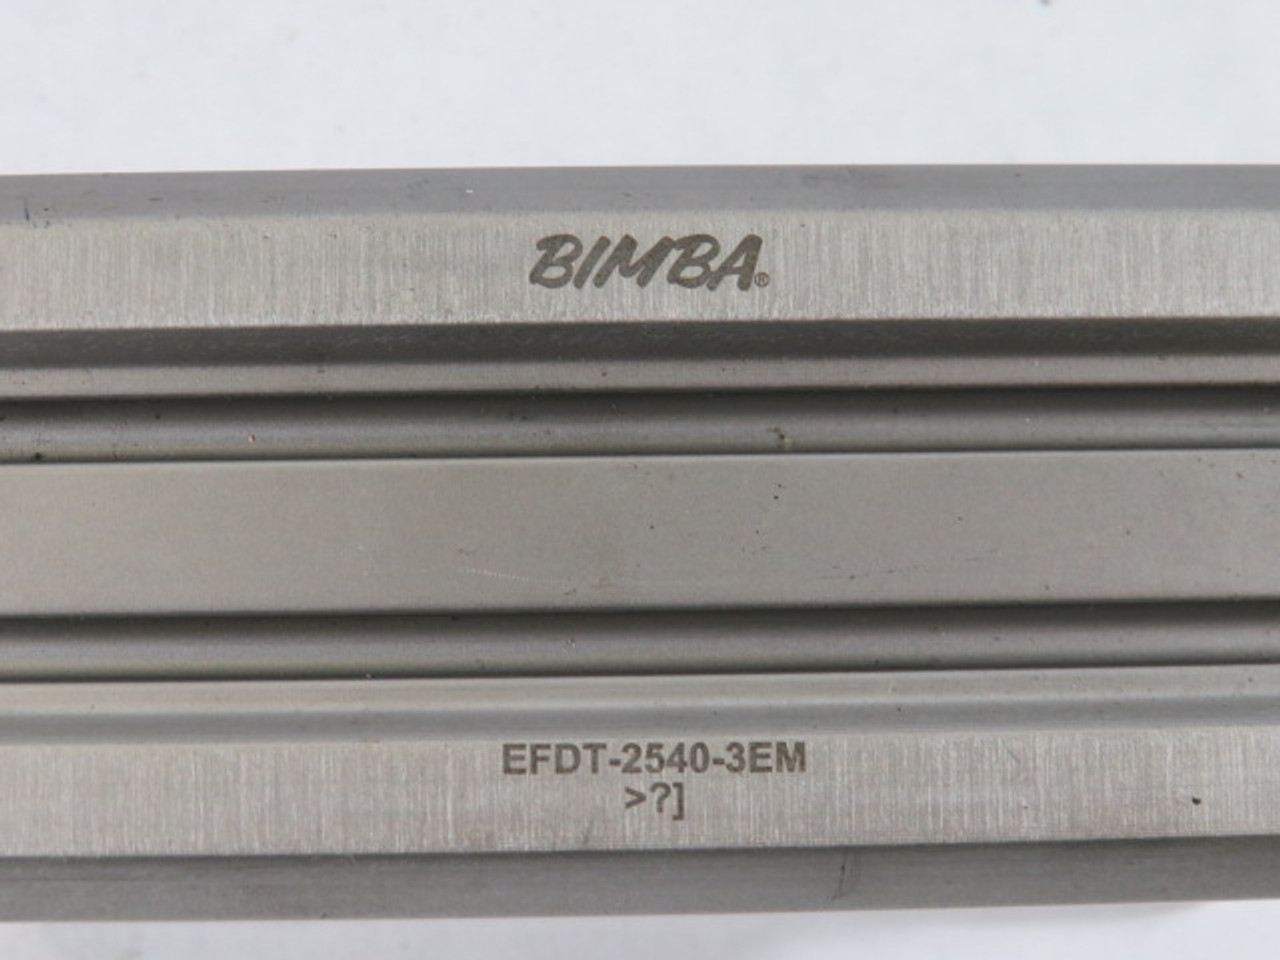 Bimba EFDT-2540-3EM Compact Guided Air Cylinder 40mm 1 1/2" Stroke USED